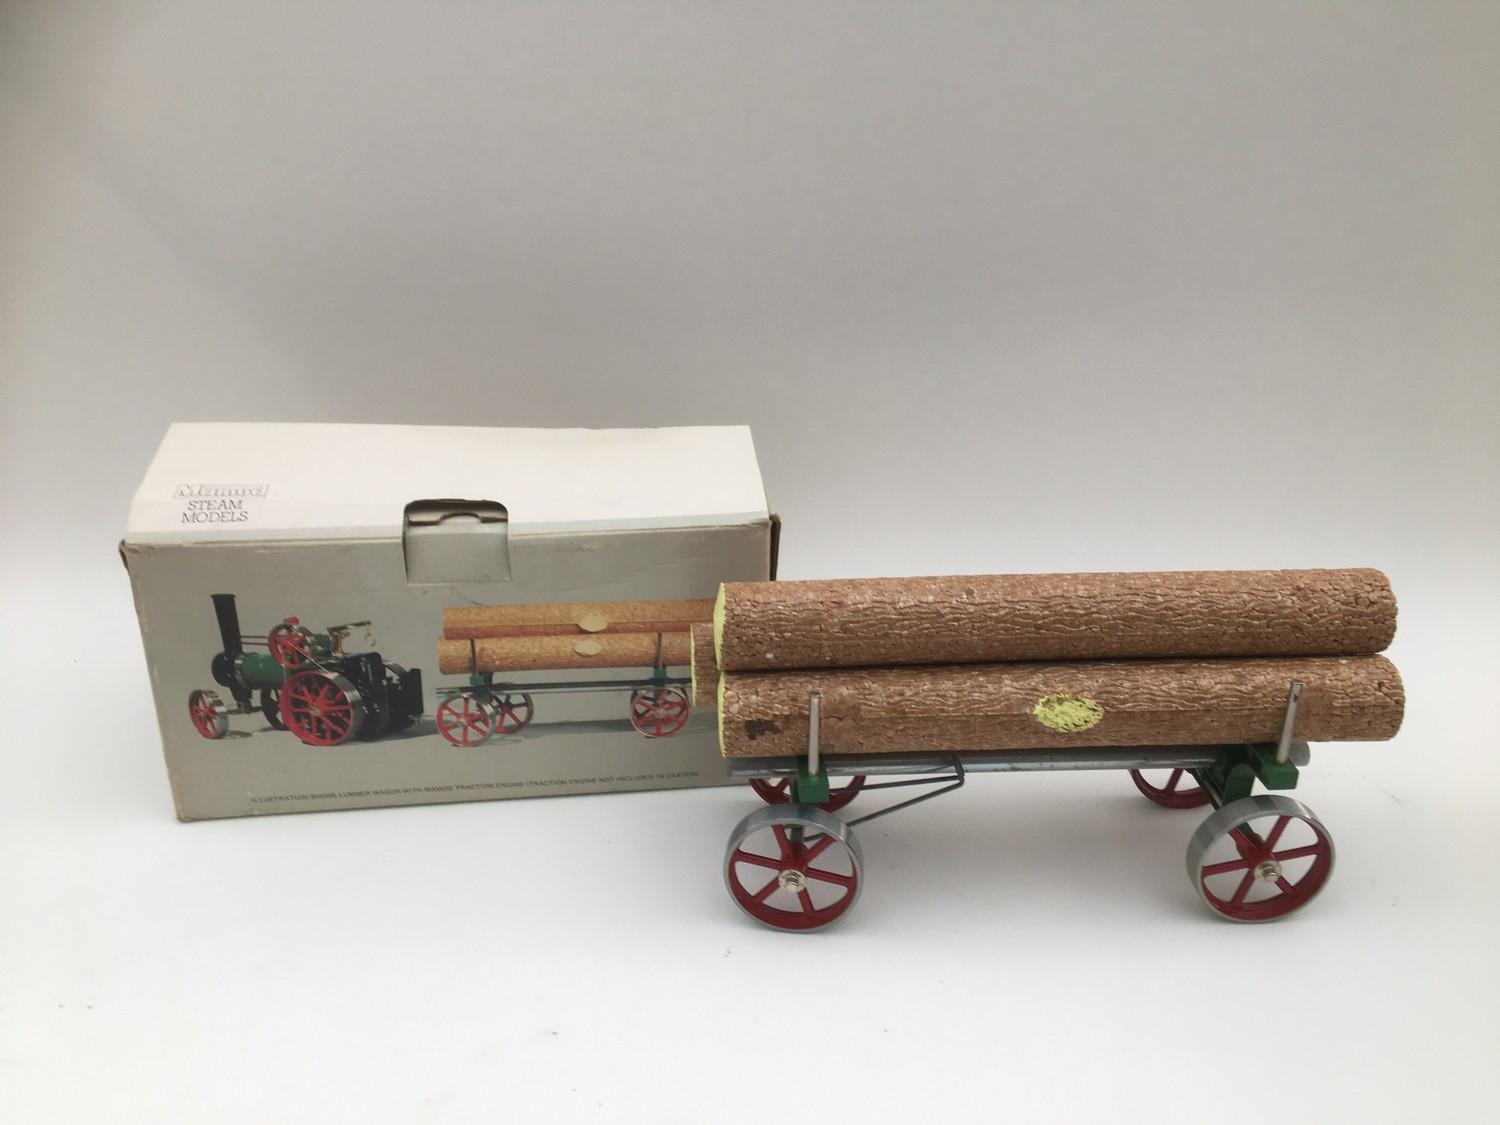 A Mamod steam engine, without its box and two Mamod trailers, an Open Wagon and a logging wagon, - Image 5 of 5